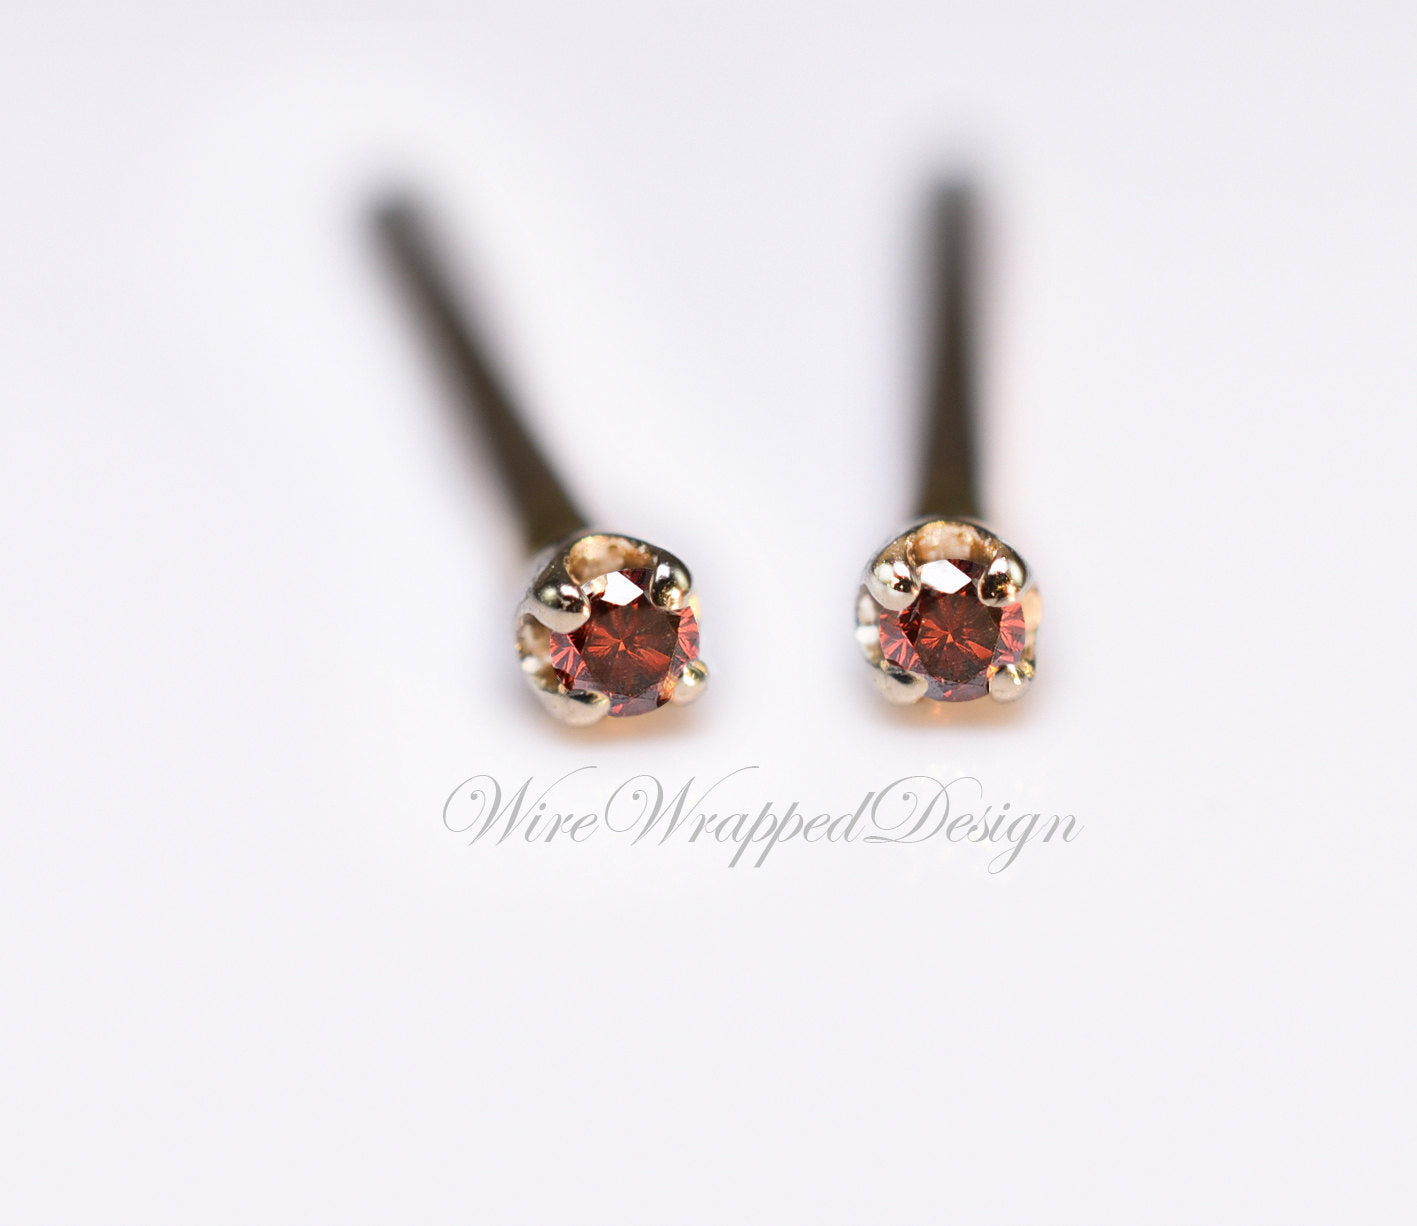 Genuine RED DIAMOND Earring Studs 1.3mm 0.02tcw Post 14k Solid Gold (Yellow, Rose or White), Platinum, Silver Lobe Cartilage Helix Tragus